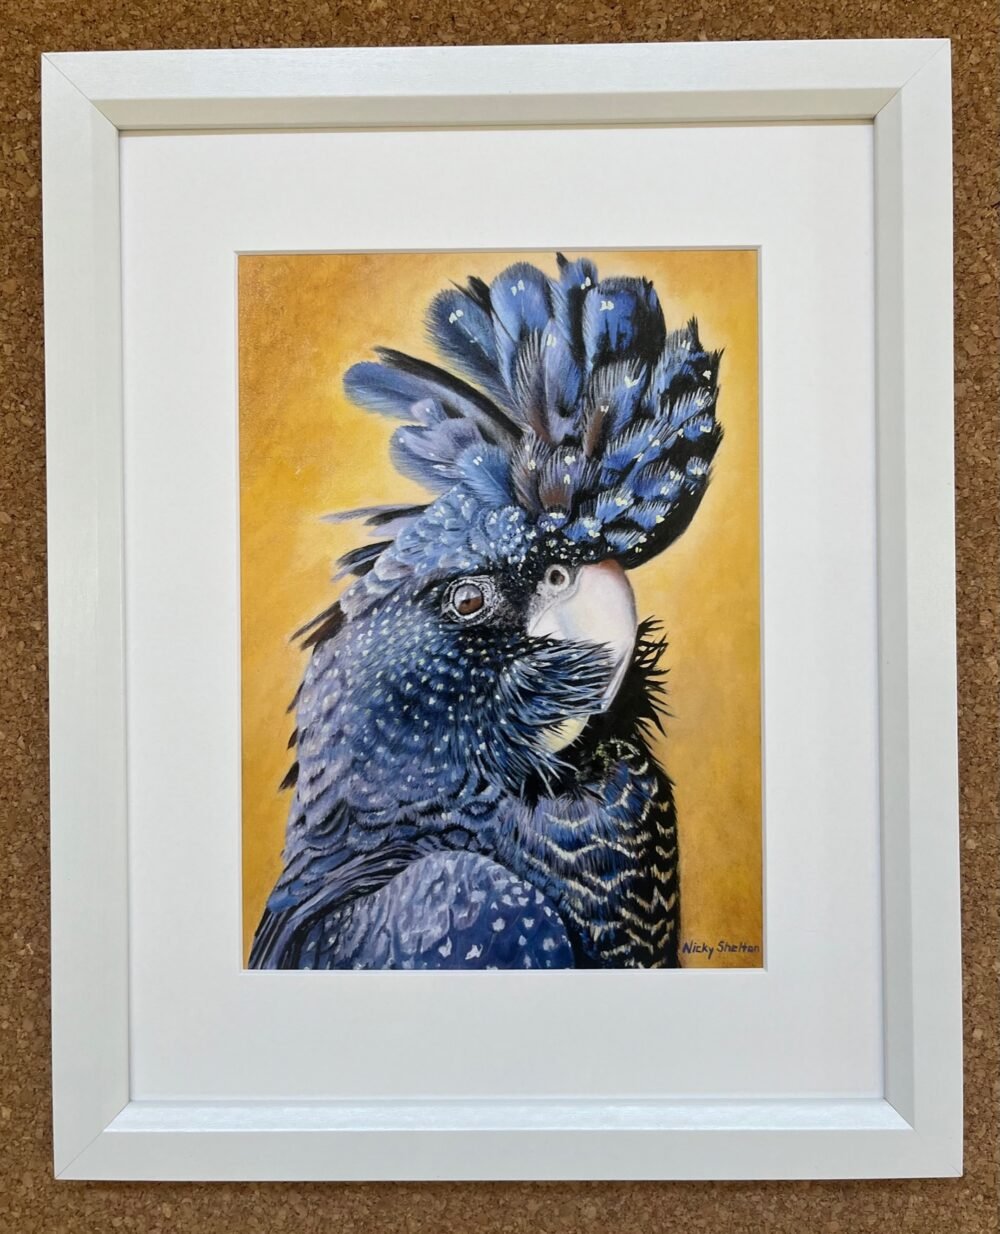 Magnificus - Print in White Frame